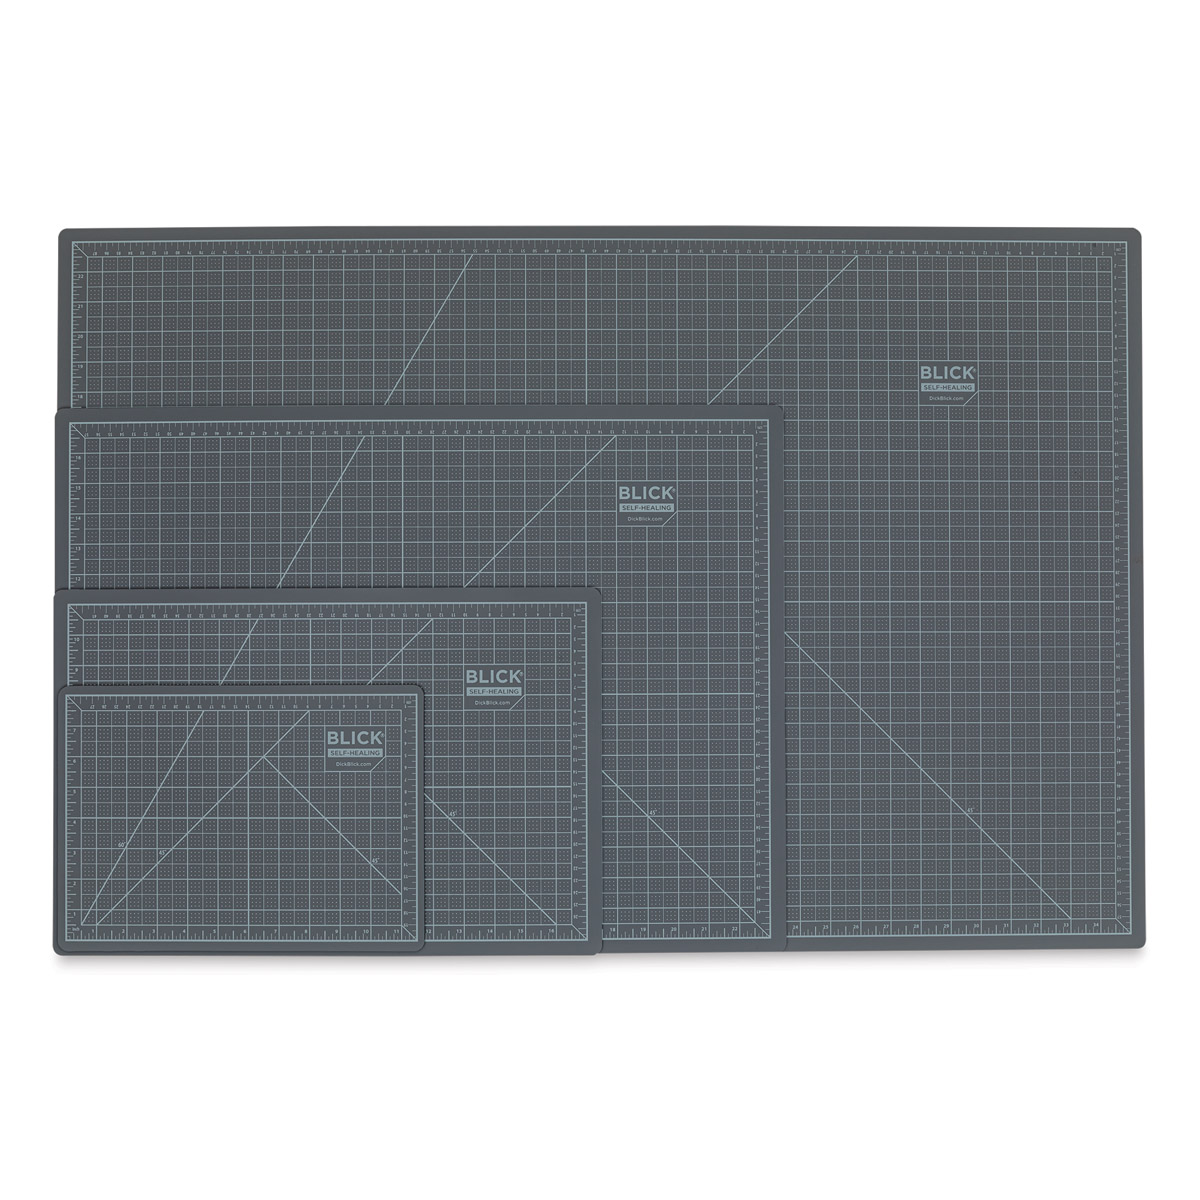 Creative Mark 9x12 Professional Self Healing Cutting Mat for Home Office & Studio Without Harming Your Desk Studio Design Lightbox Shop Craft & Hobby Use 9x12 - Green 